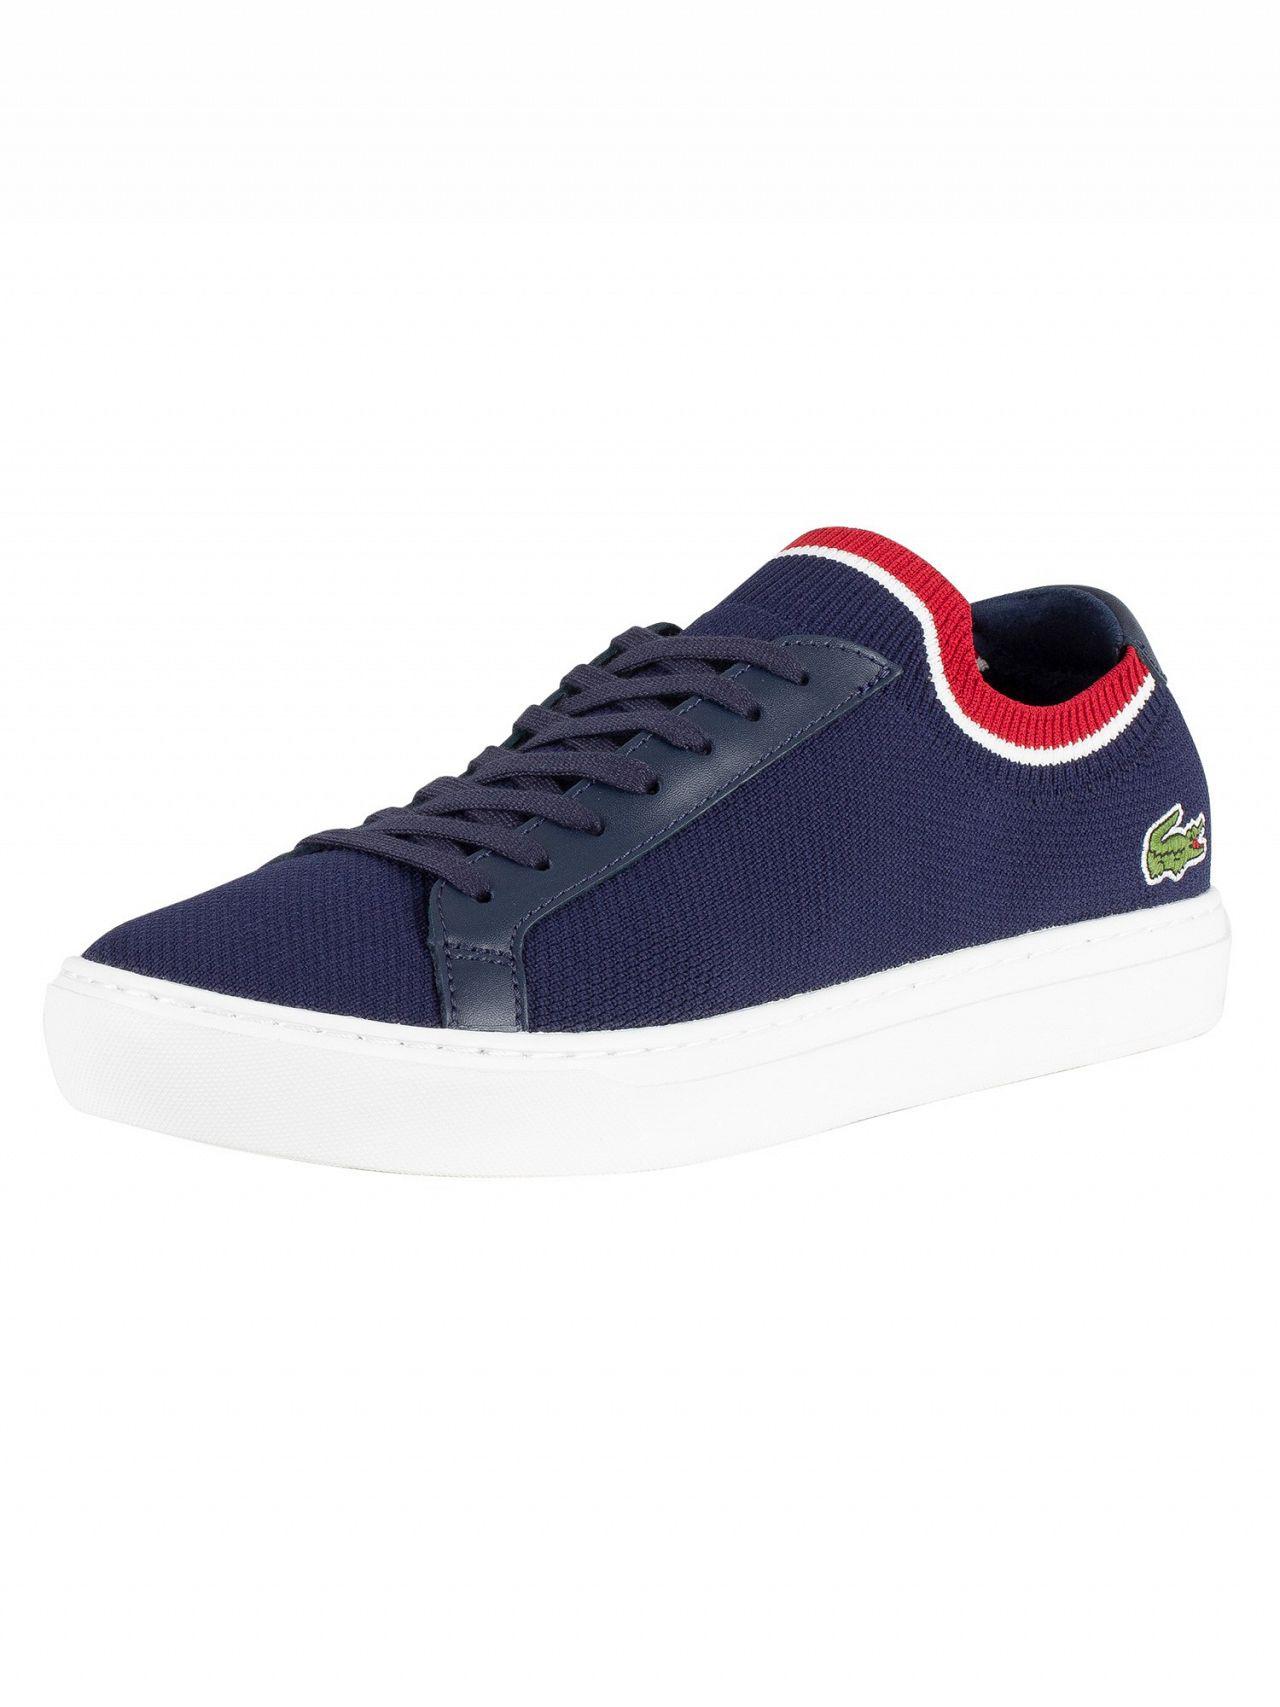 Lacoste Lace Navy/white/red La Piquee 119 1 Cma Trainers in Blue for Men |  Lyst